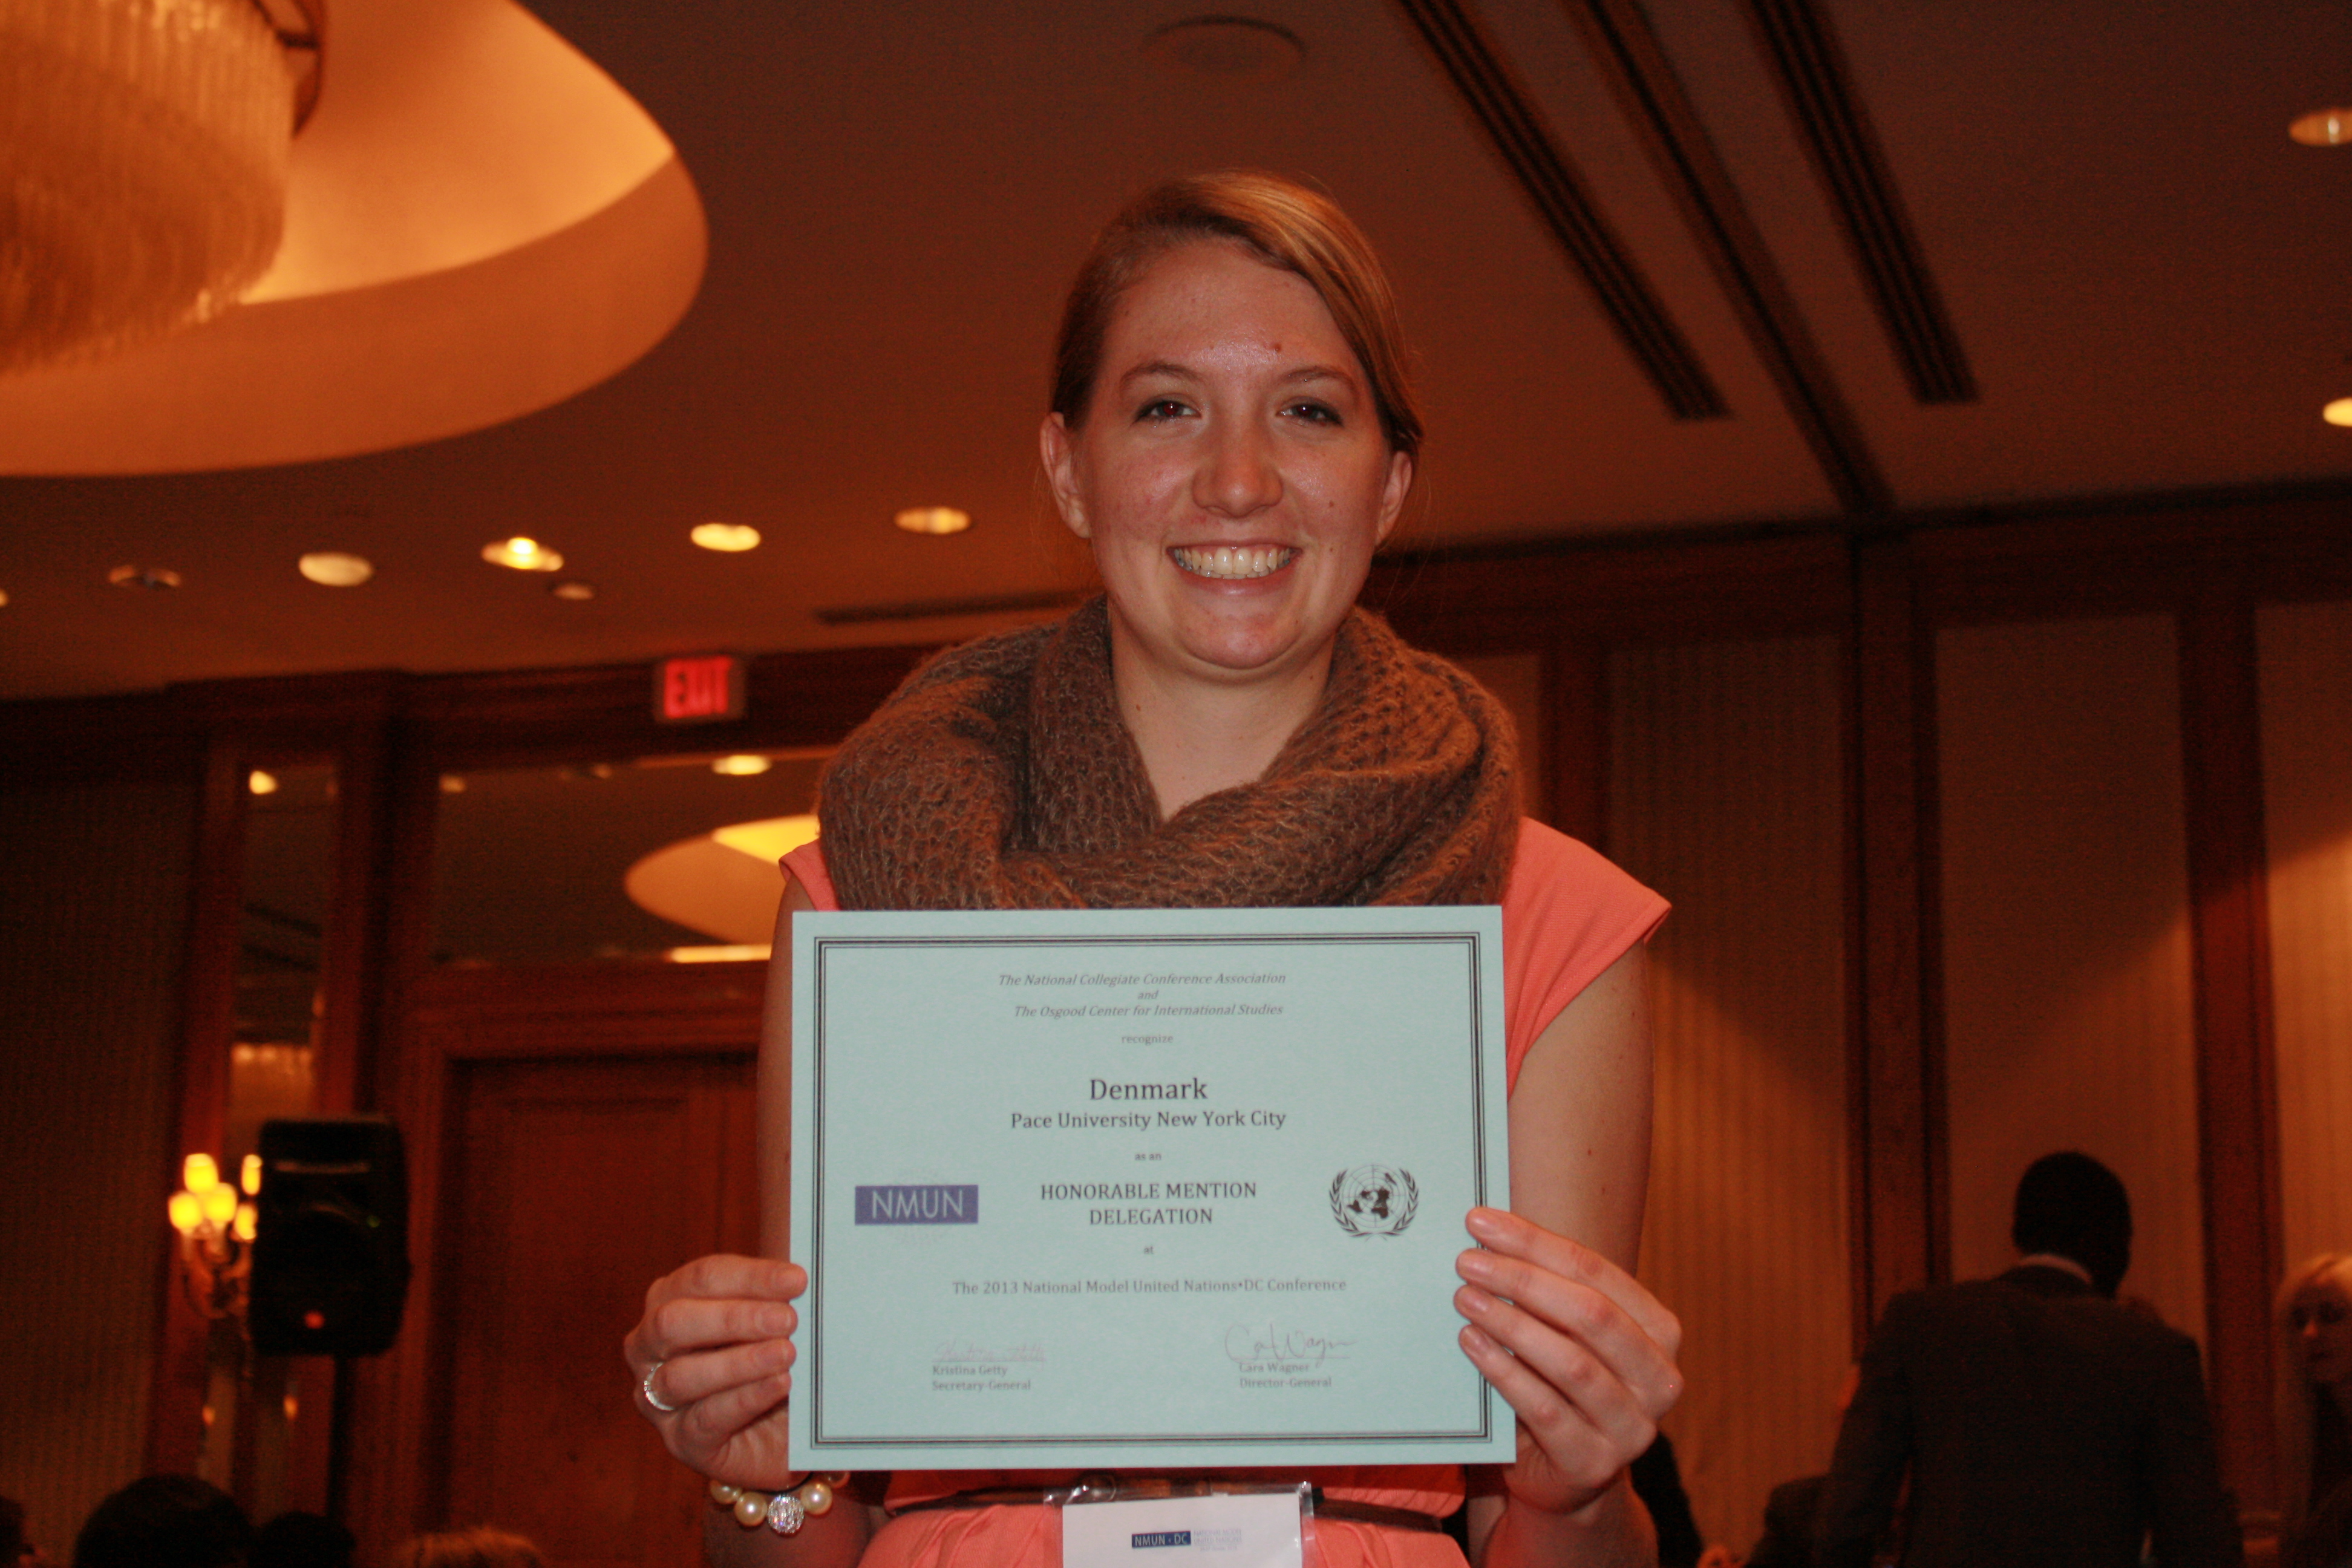 Head delegate Kelsey McGhee, head delegate of the Pace University New York City Model UN program, shows off an awarded granted to the students representing ?? at the 2013 National Model UN conference in Washington DC